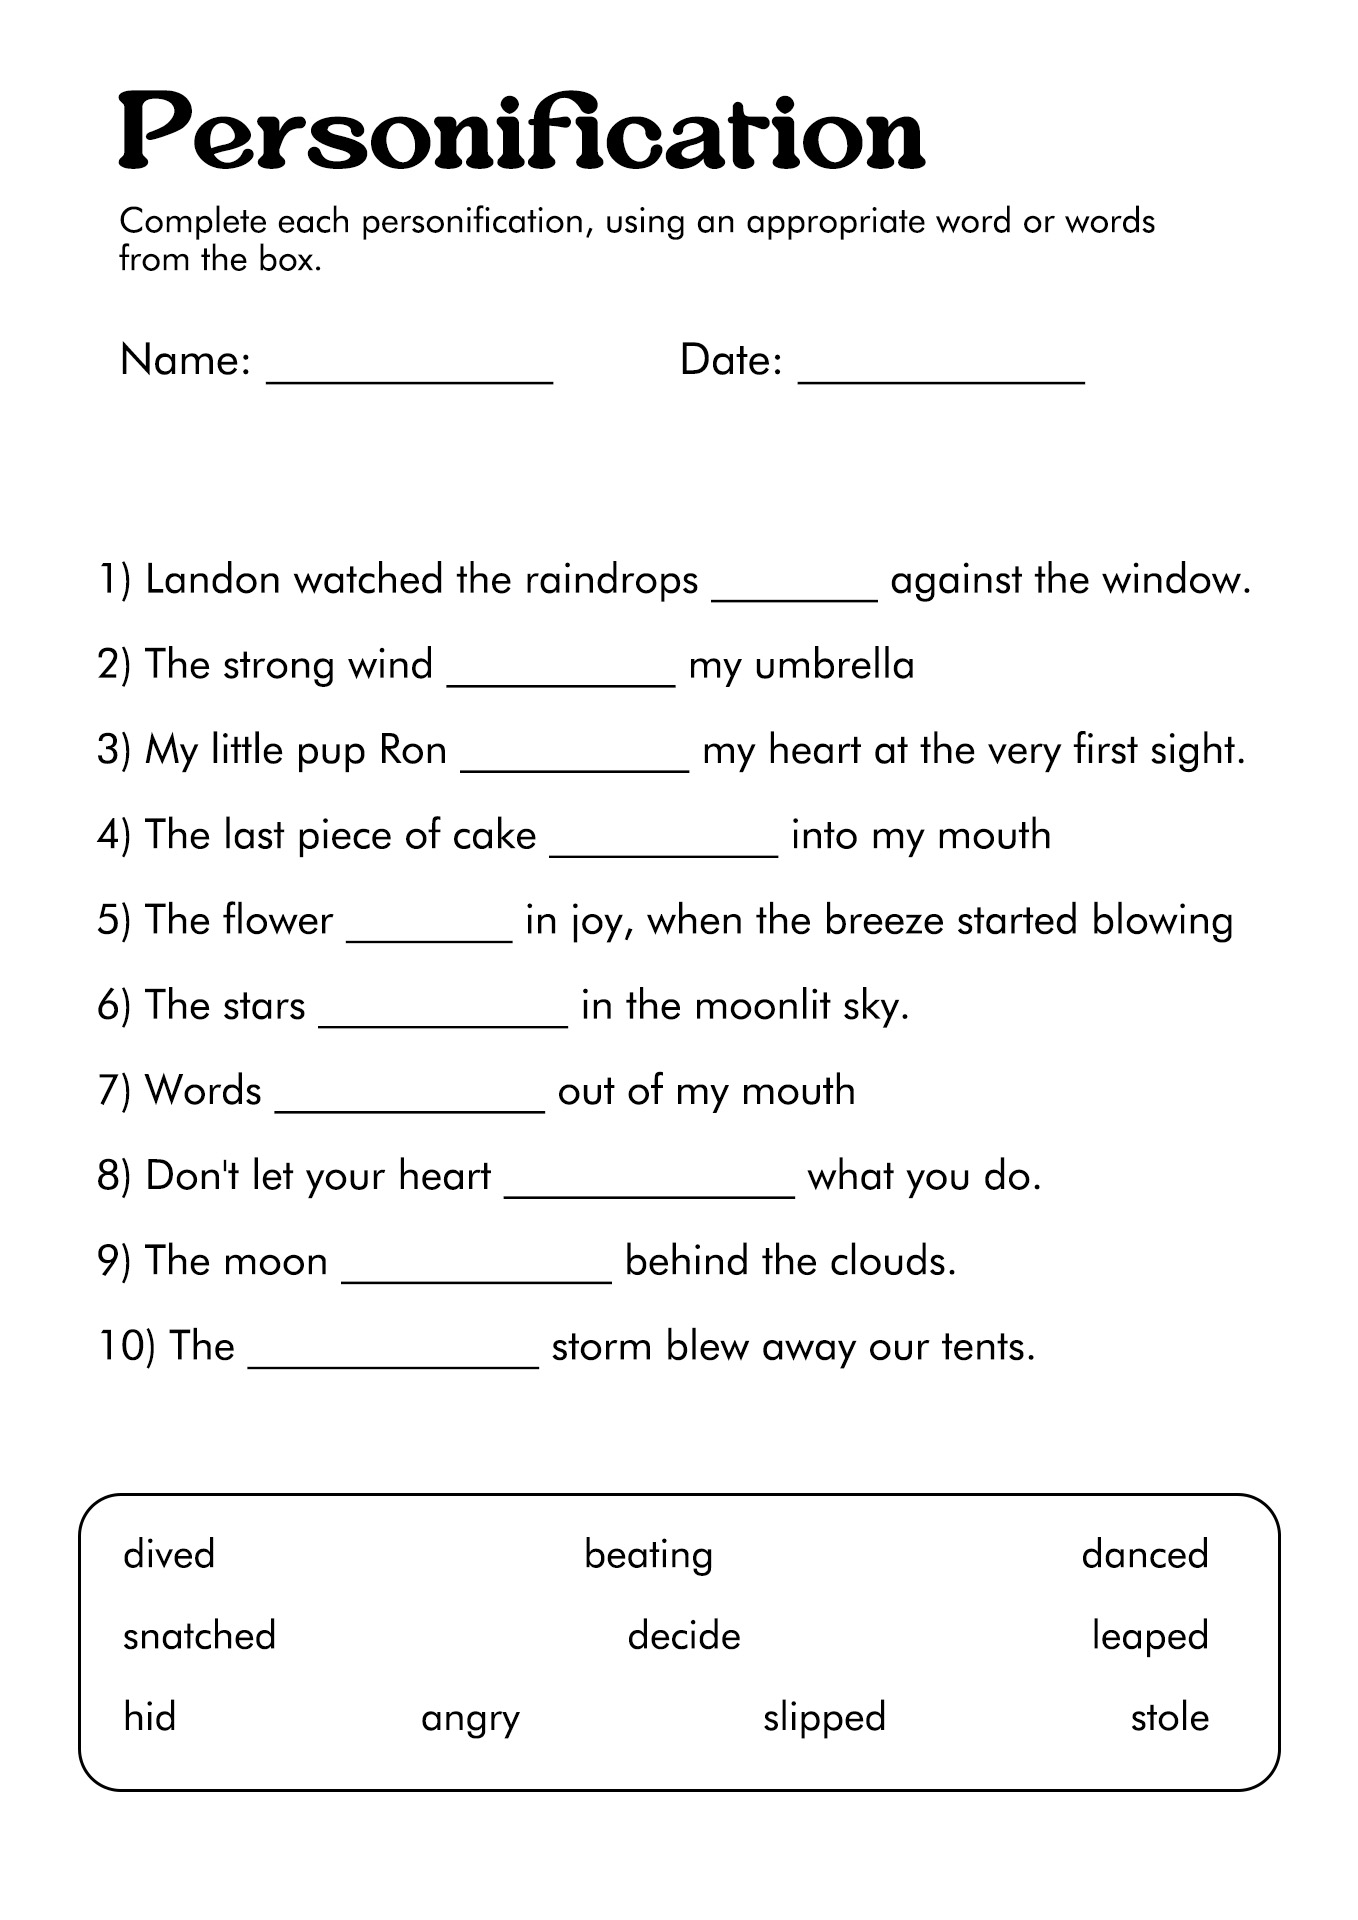 Daily Grammar Practice Worksheets 7th Grade 1000 Ideas About 7th Grade Writing On Pinterest